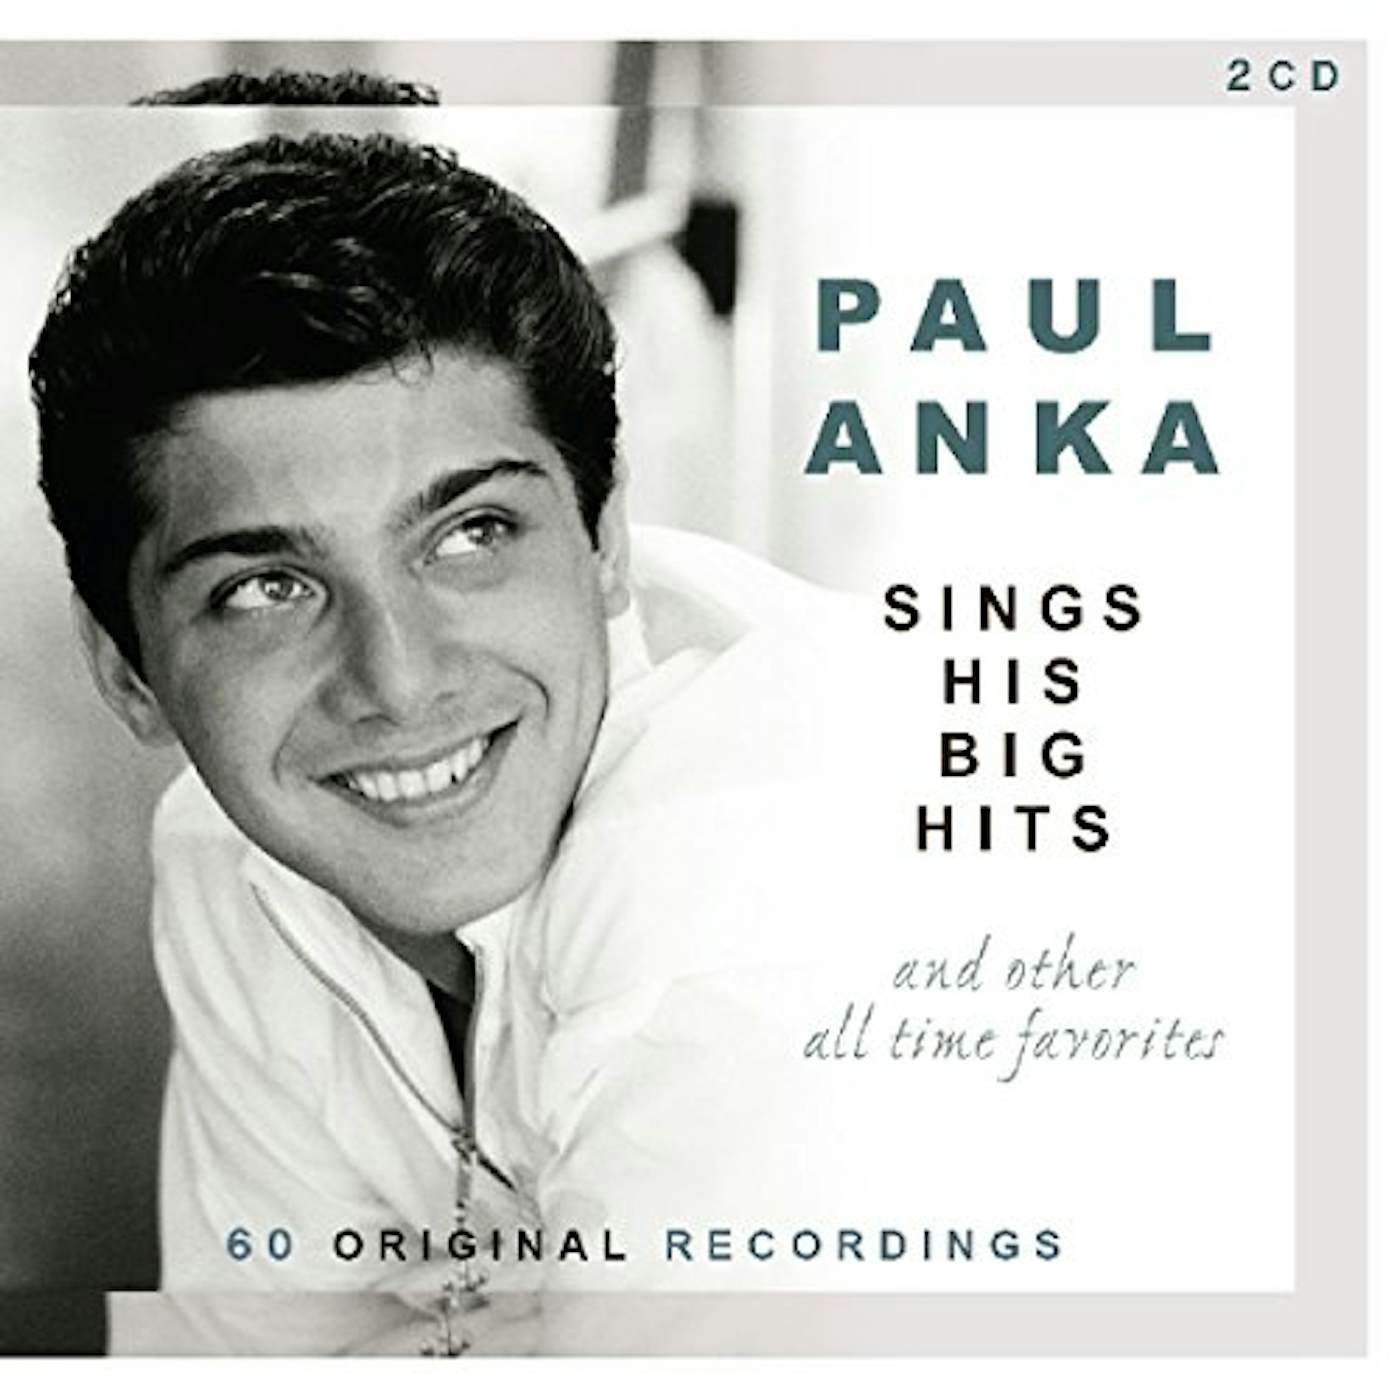 Paul Anka SINGS HIS BIG HITS & OTHER ALL-TIME FAVORITES CD